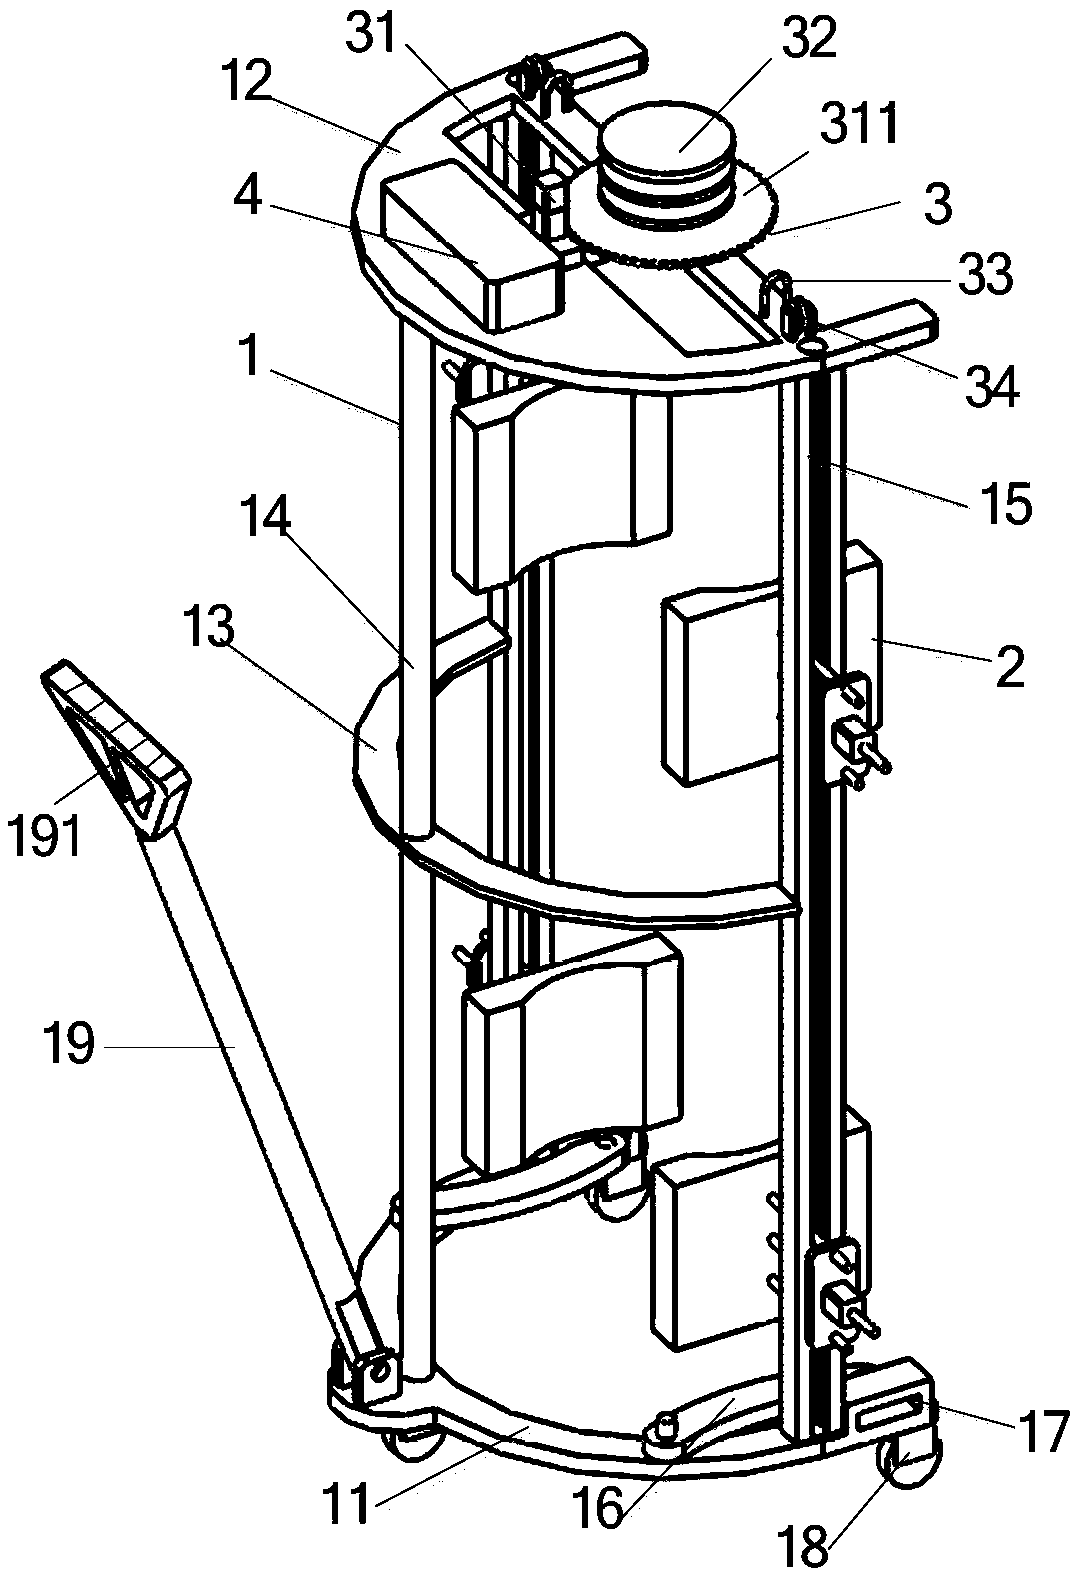 An electric oil drum handling device